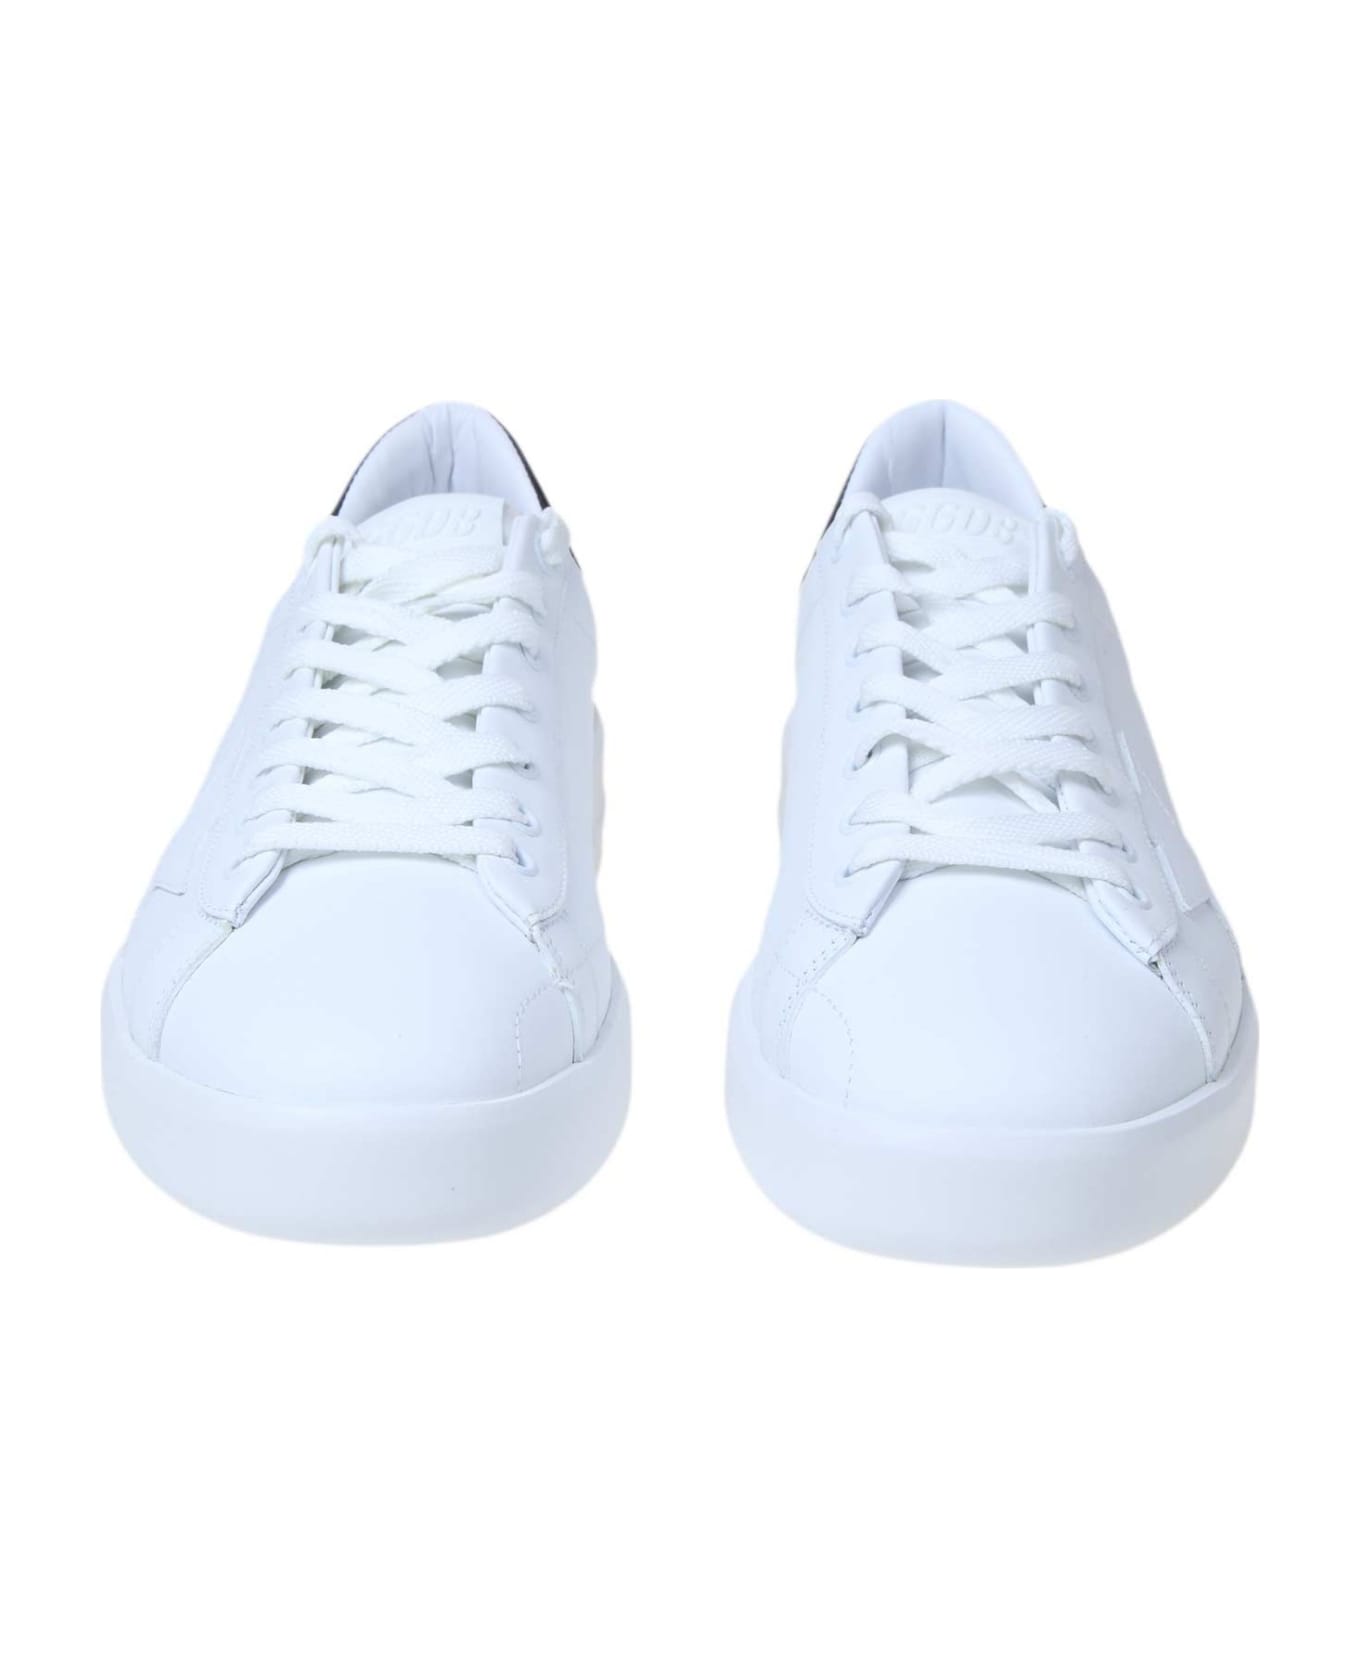 Golden Goose Pure Star Leather Low-top Sneakers - White/Black